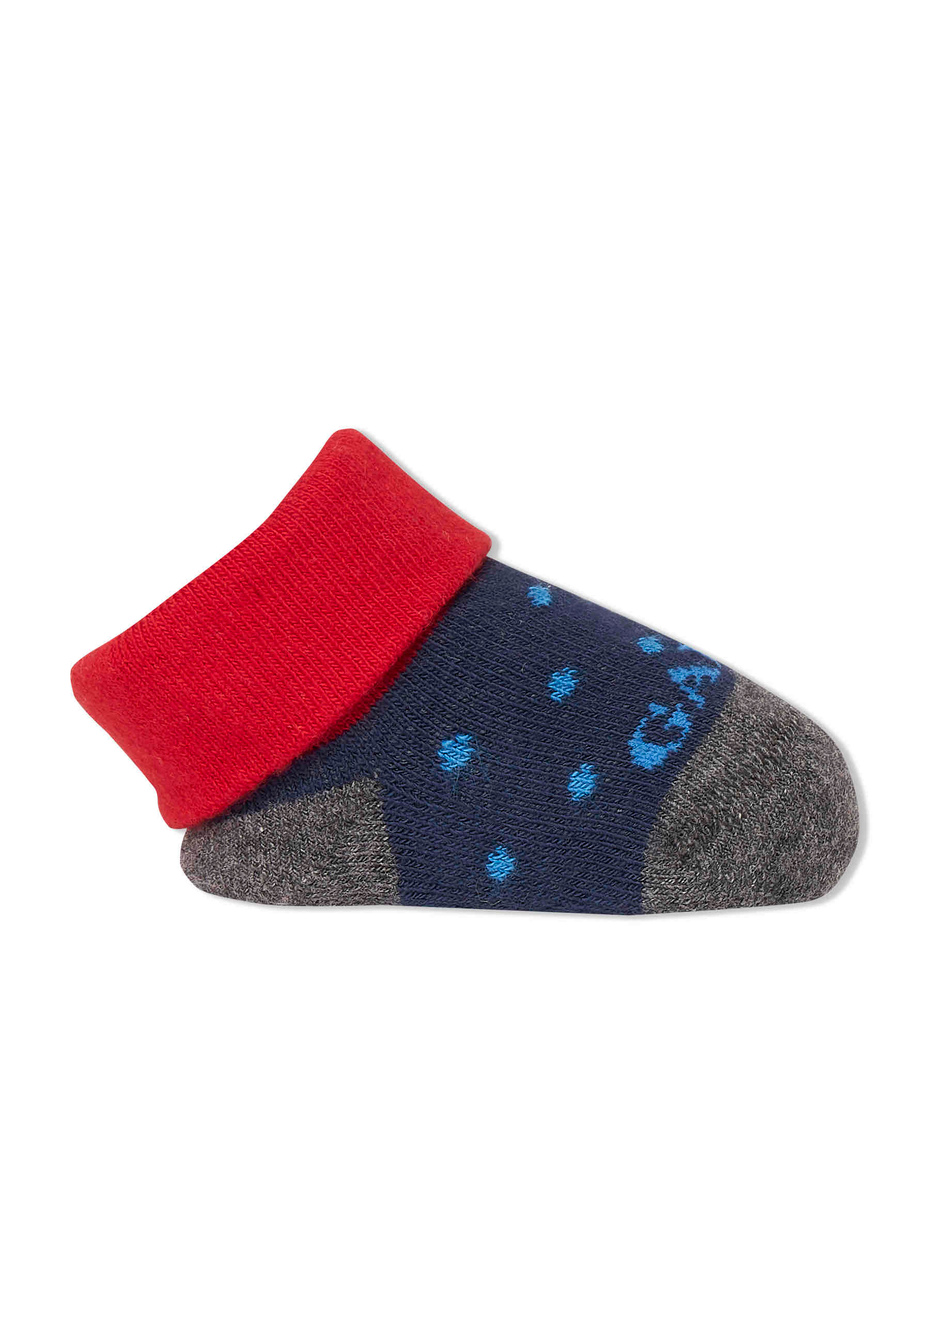 Kids' blue cotton booties with polka dots - Gallo 1927 - Official Online Shop